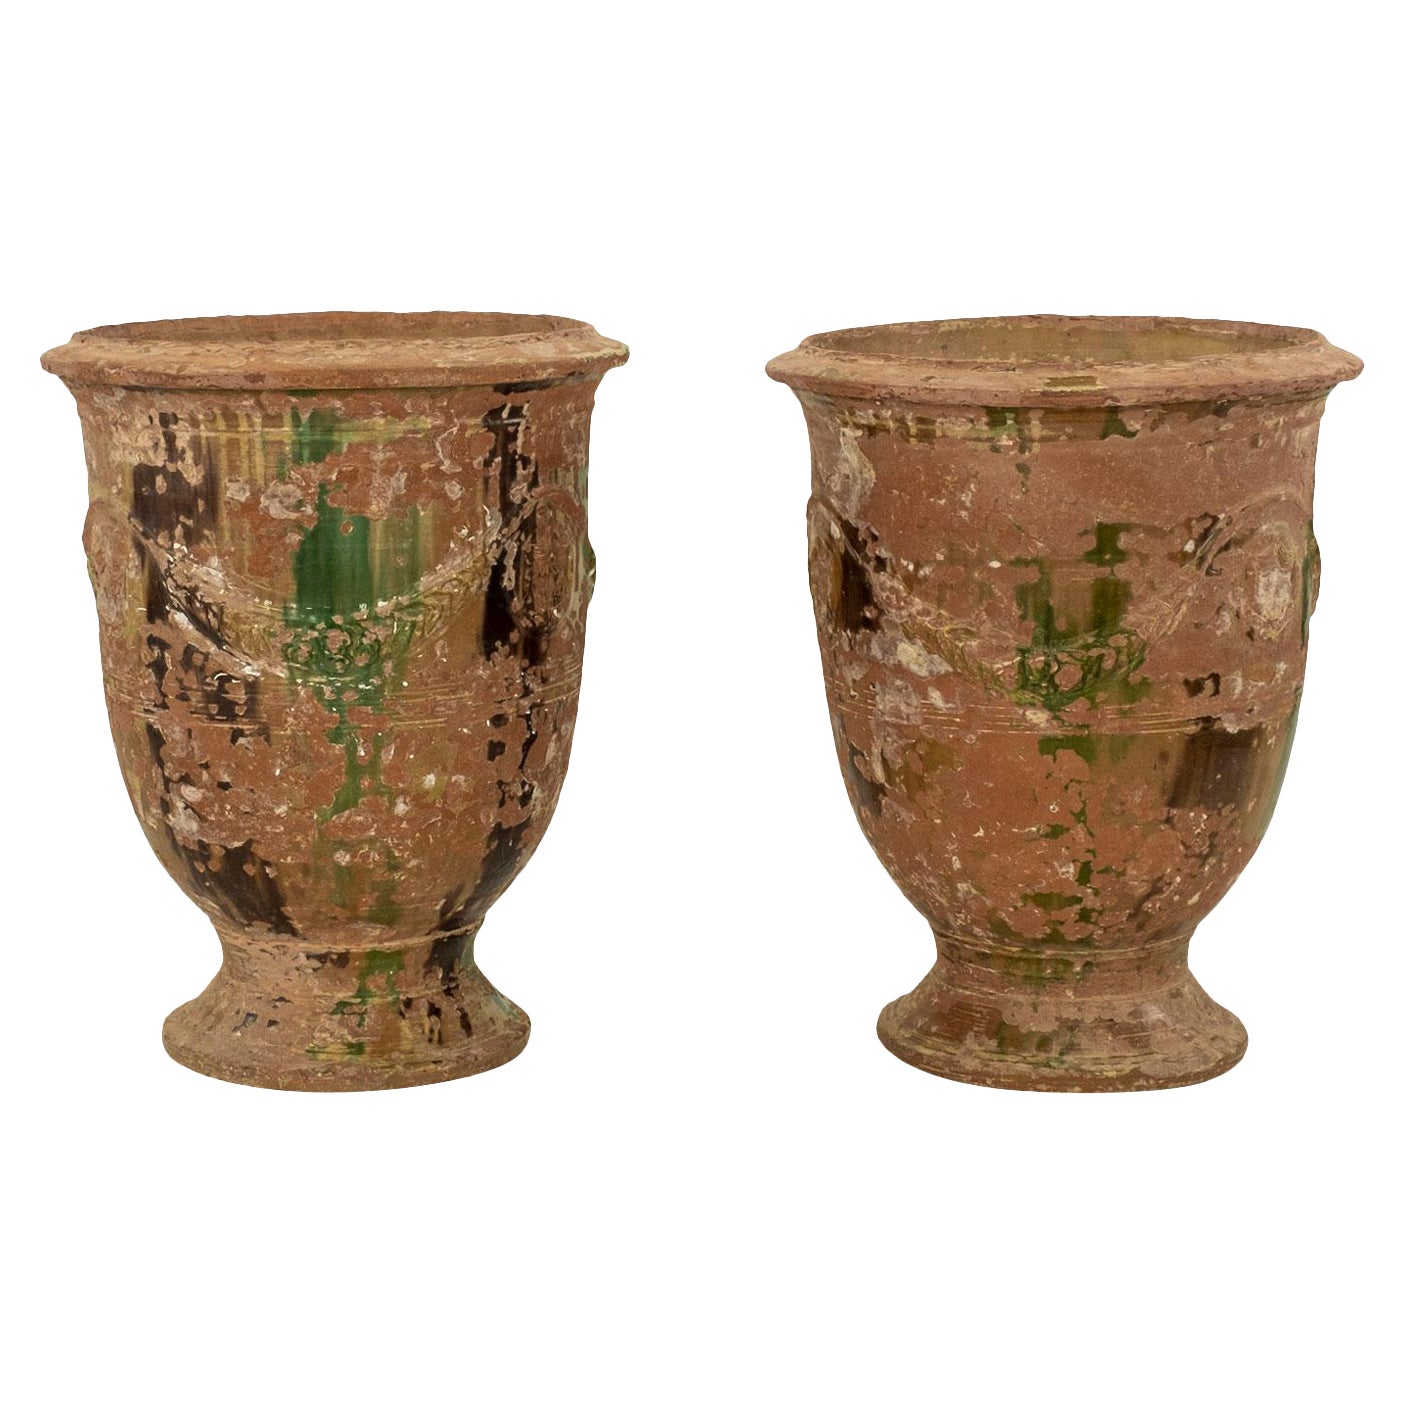 Pair of Large Early 19th Century Anduze Jars by Boisset